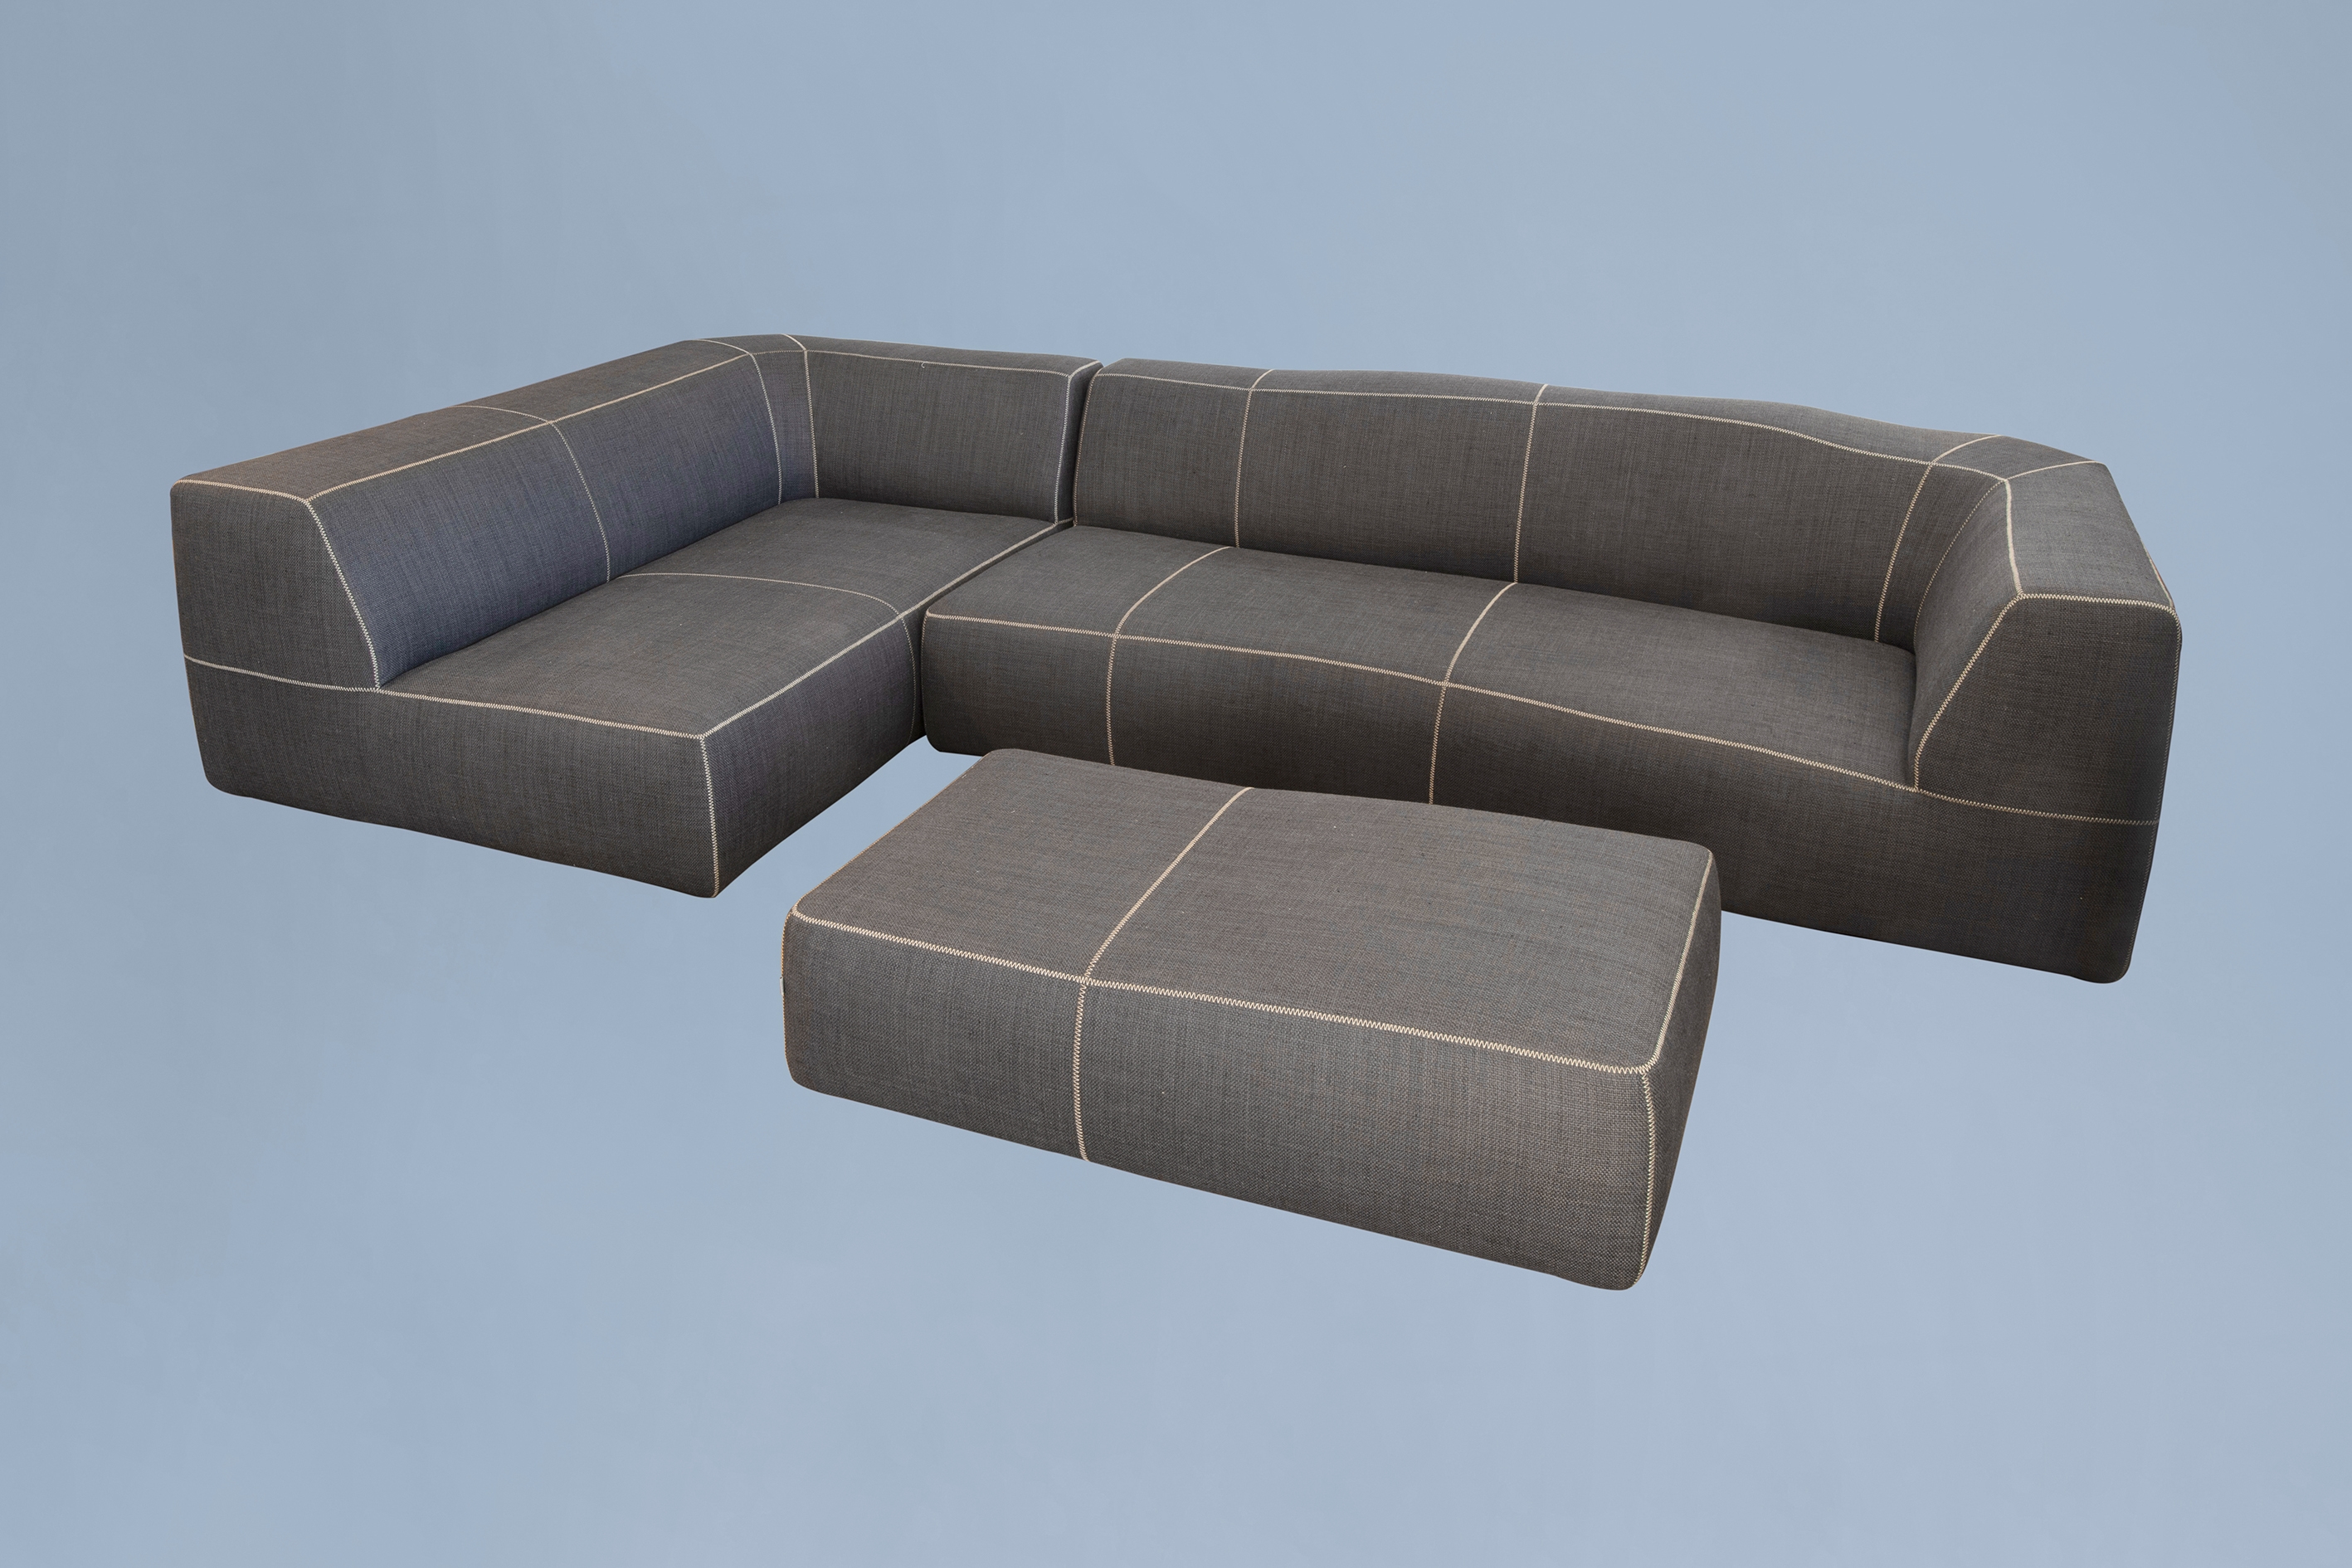 Patricia Urquiola - Tufty-Time Sectional Couch by Patricia Urquiola - 2000's